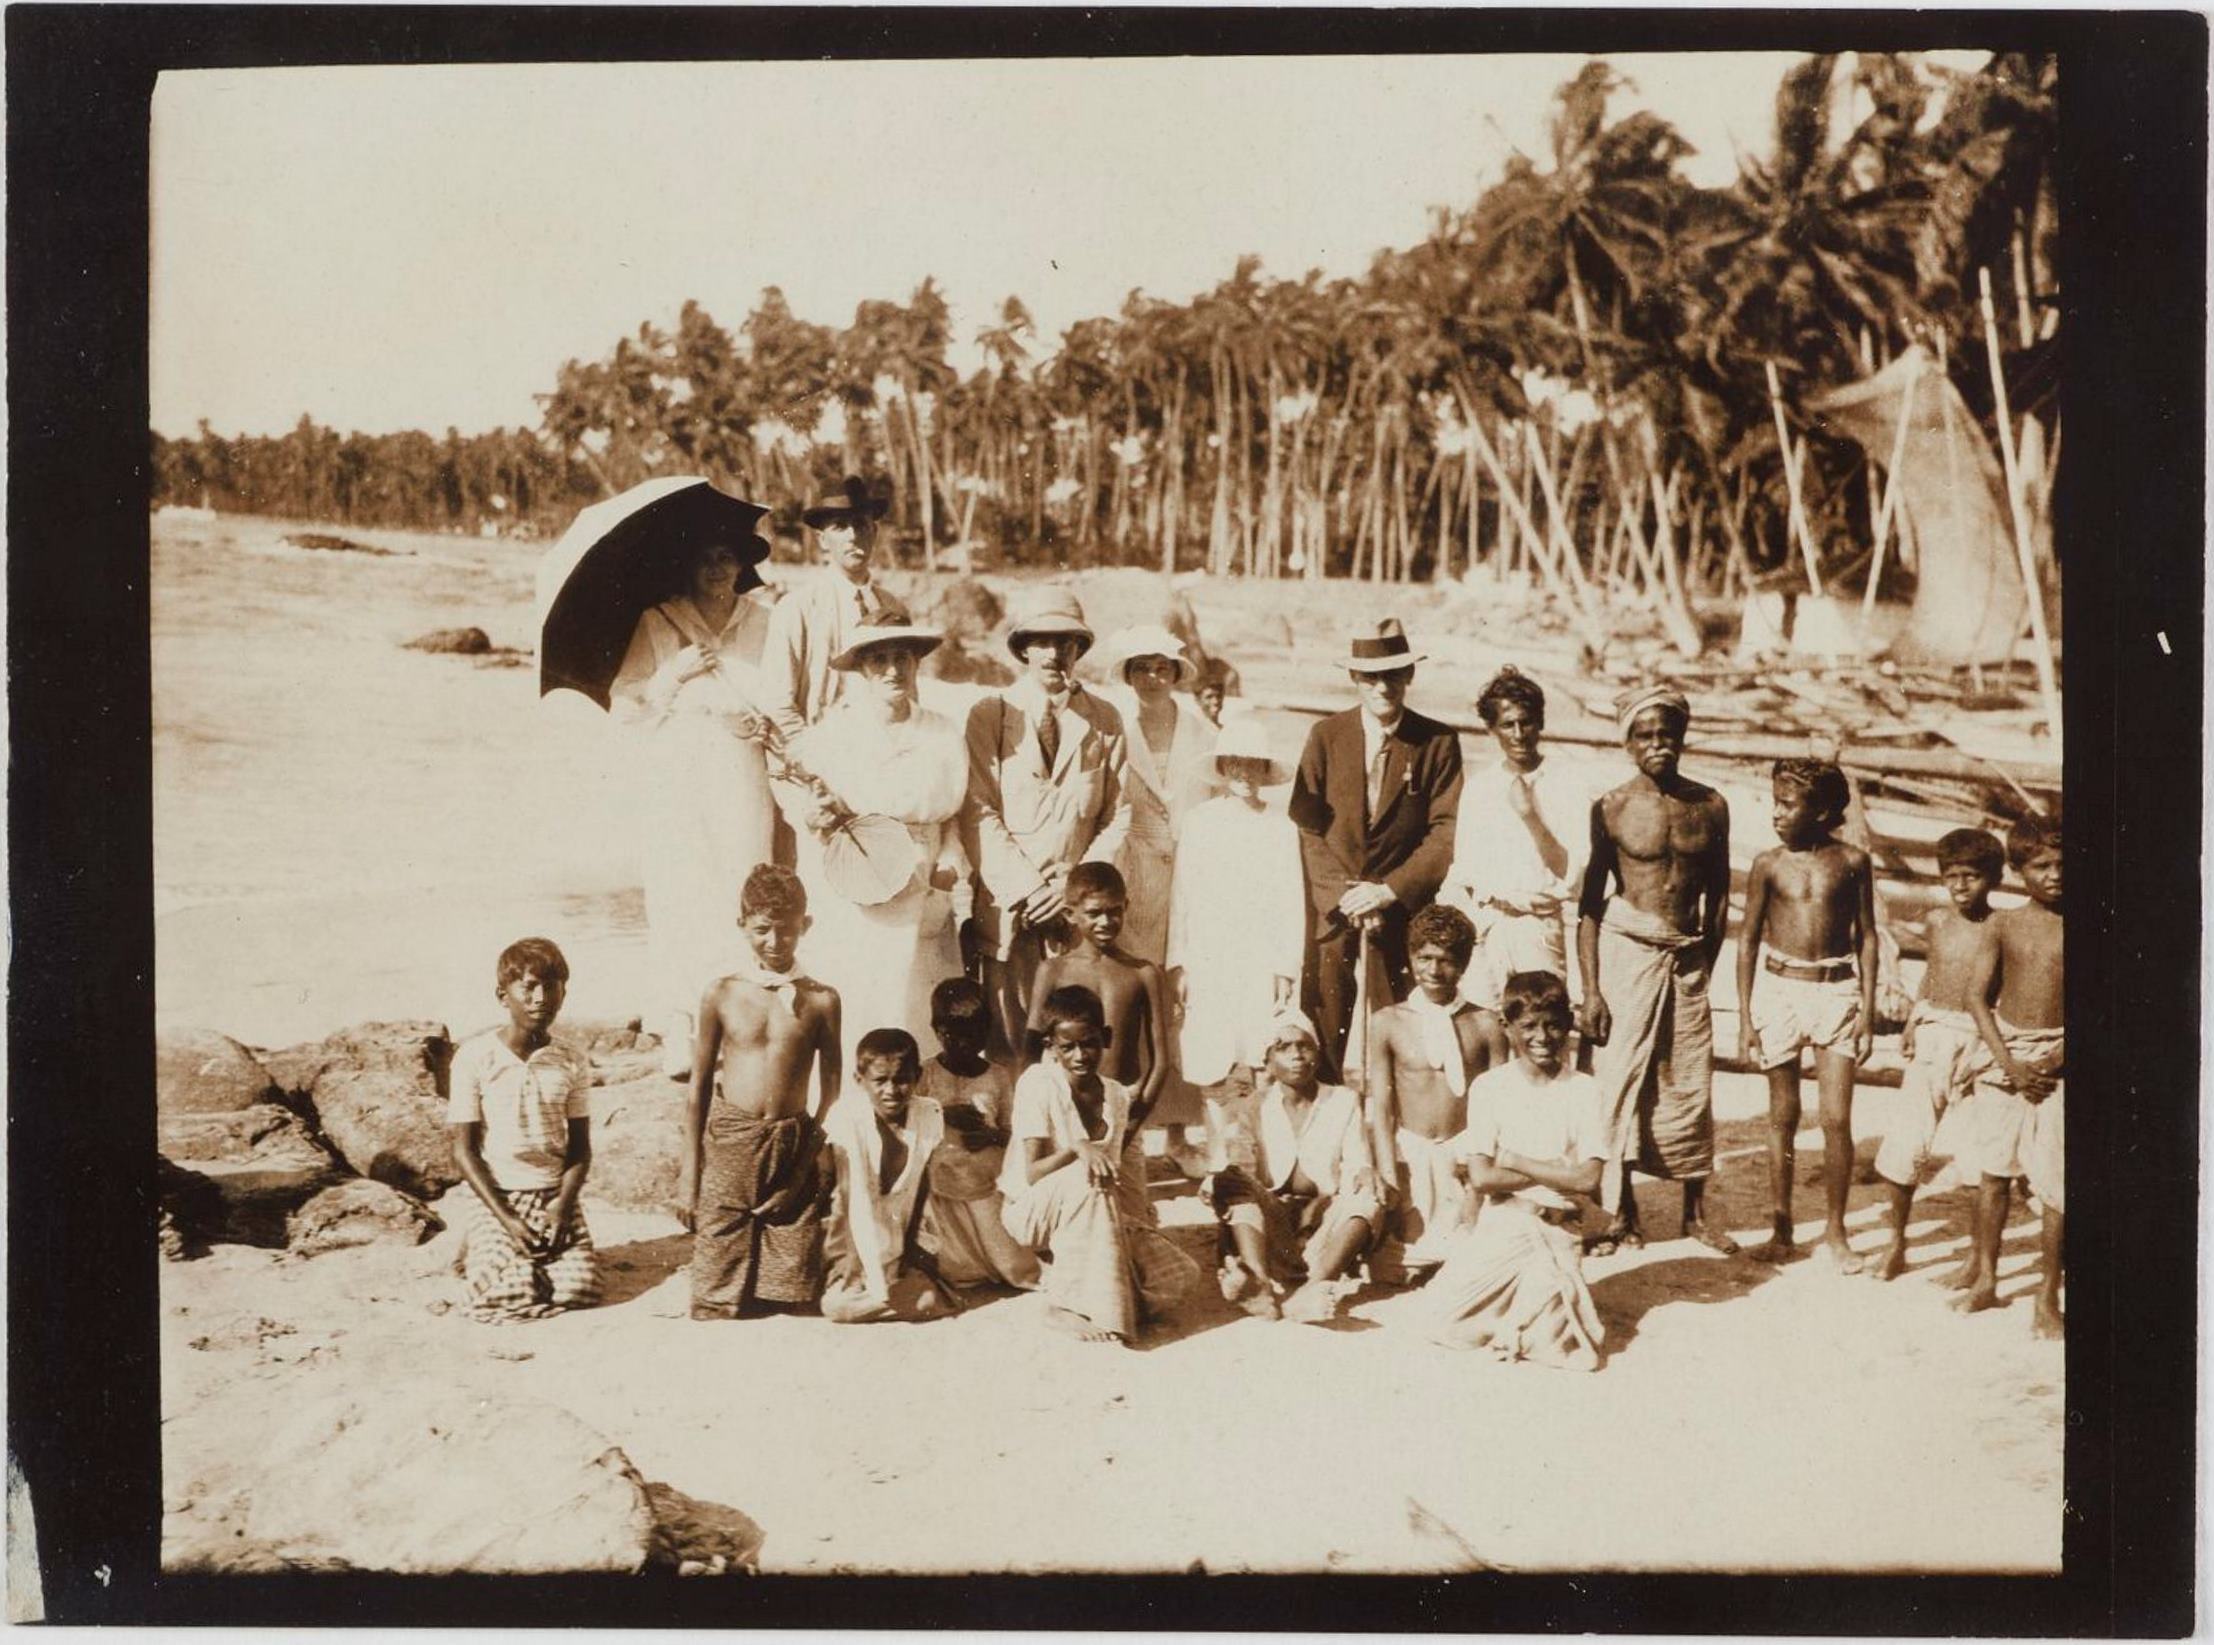 Travellers from the Osterley (including Leslie and Dora Walford) with Sinhalese locals at Mount Lavinia beach, Colombo, Ceylon (Sri Lanka), 6 April 1919 / photographer unknown